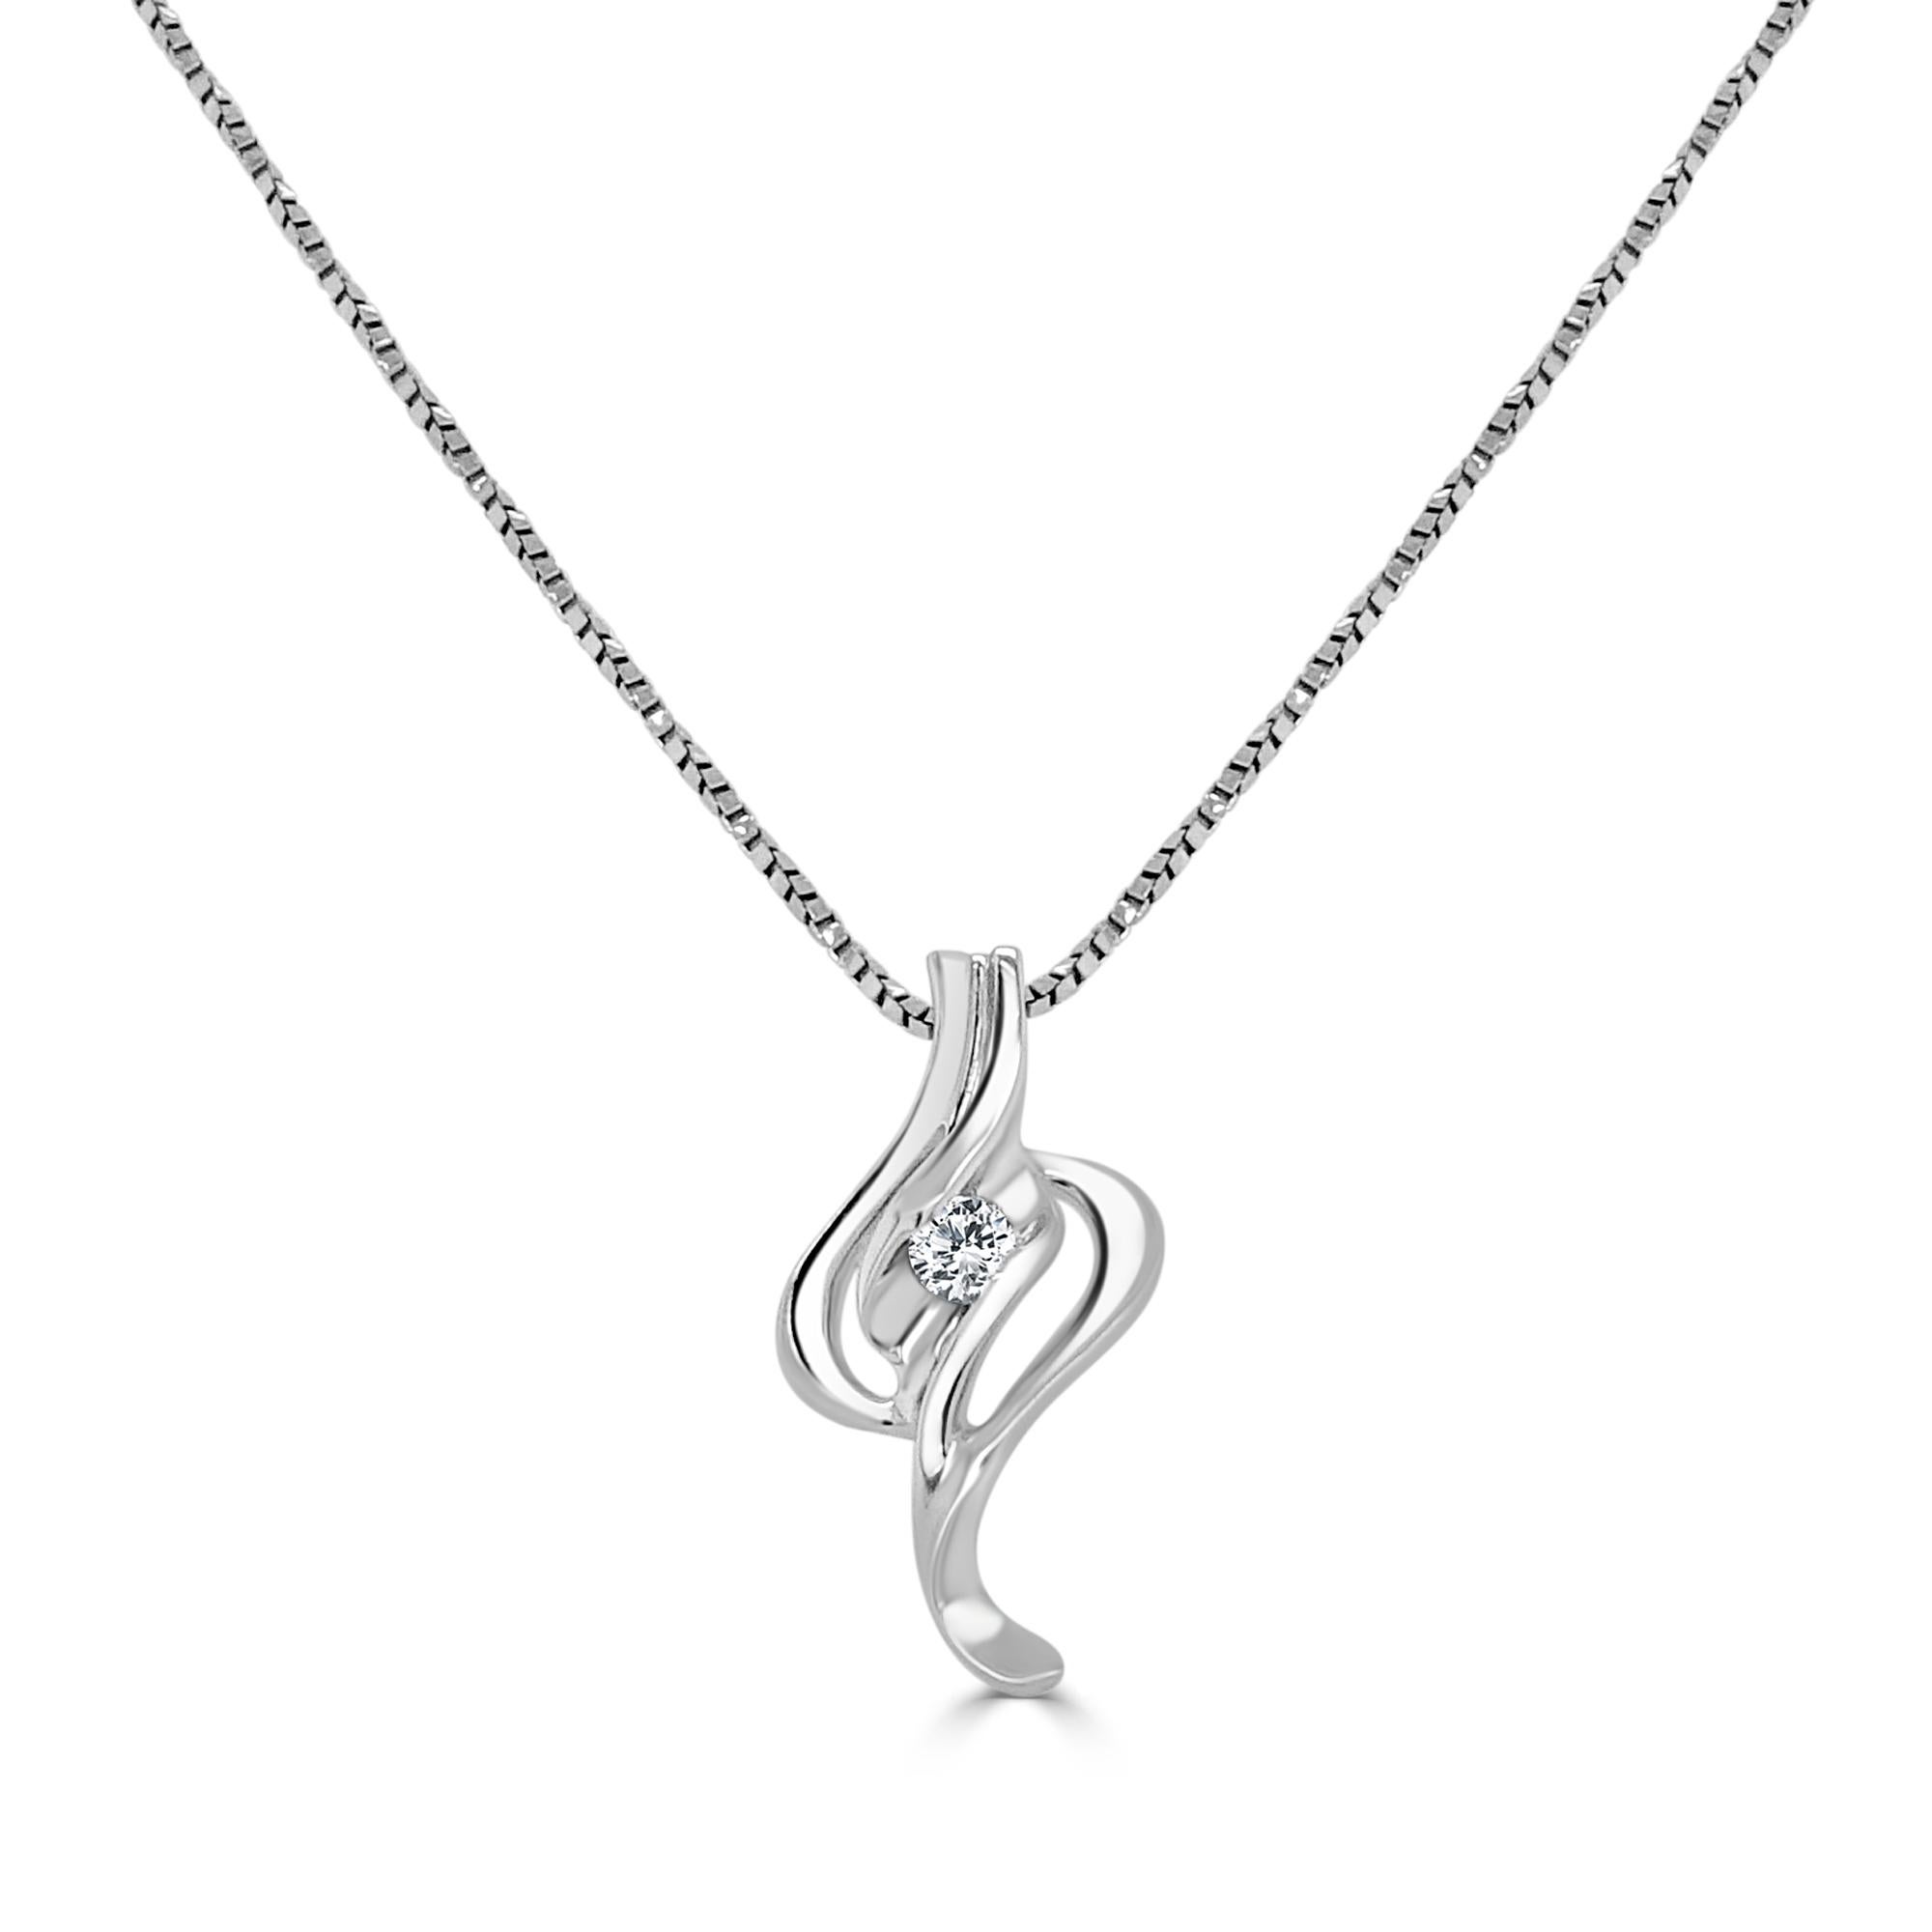 18 Karat White Gold 0.05 Carat Diamond Chain Necklace Wedding Fine Jewelry 

Gentle and elegant pendant is crafted in a sleek white gold. Featuring round cut diamonds, together totaling 0.05 TCW. Suspended from a 16-inch stunning non-tangle, non